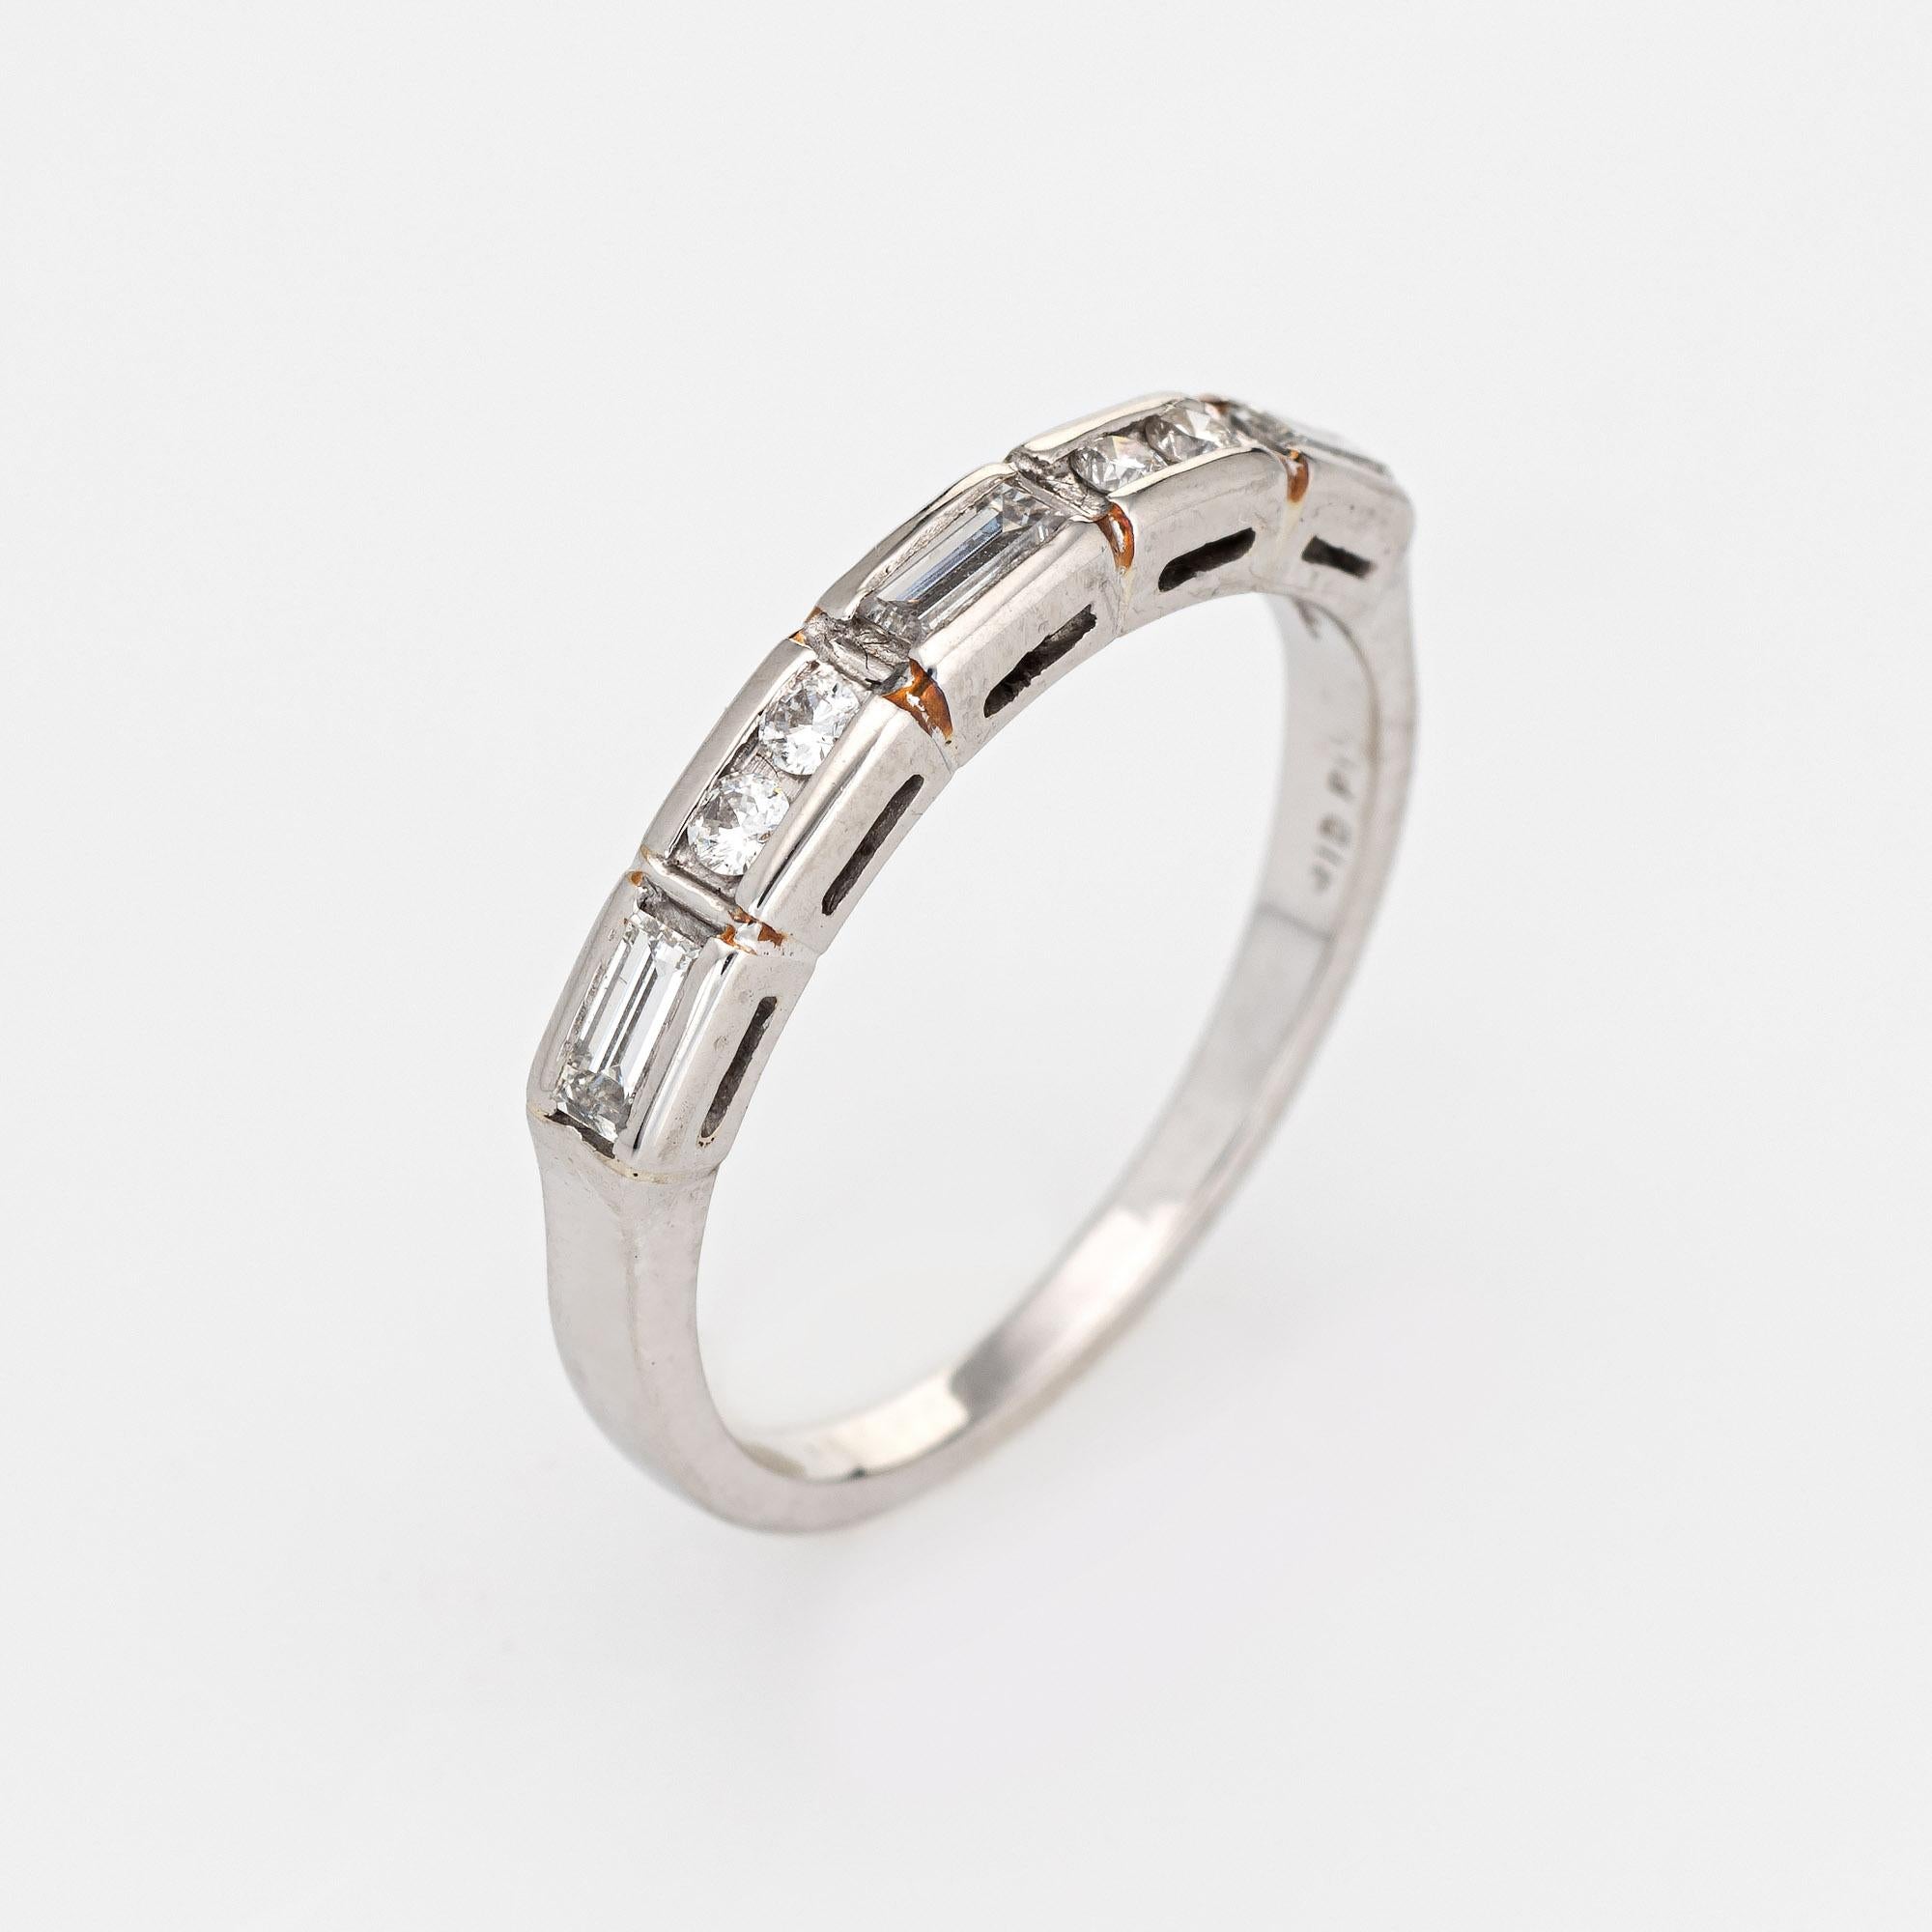 Stylish vintage mixed cut diamond band (circa 1950s to 1960s) crafted in 900 platinum.

Round brilliant & straight baguette cut diamonds total an estimated 0.20 carats (estimated at H-I color and VS2-SI1 clarity). 

The simple and elegant band is